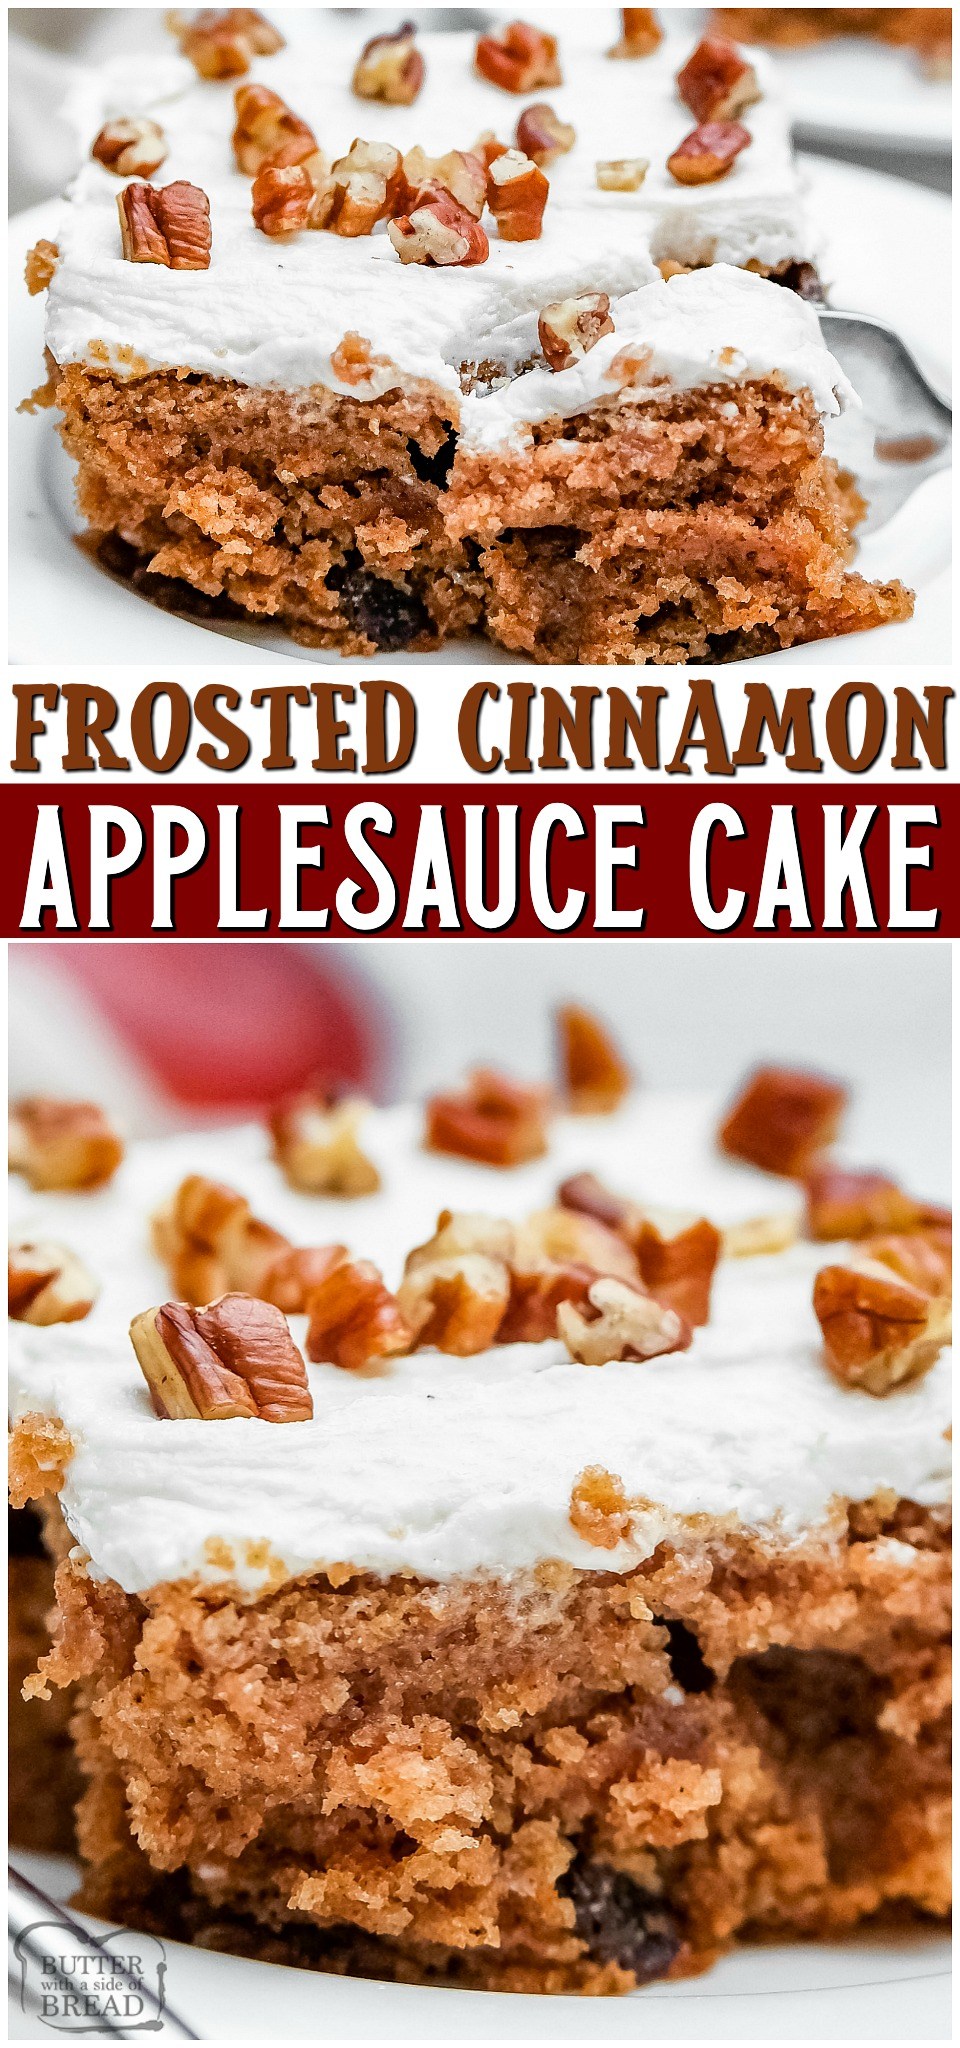 Frosted Applesauce Cake is Fall in cake form! Tender cake with cinnamon & spice, raisins and nuts baked then topped with creamy frosting. Spiced applesauce cake recipe that everyone adores! #cake #applesauce #apples #cinnamon #frosting #baking #dessert #recipe from BUTTER WITH A SIDE OF BREAD